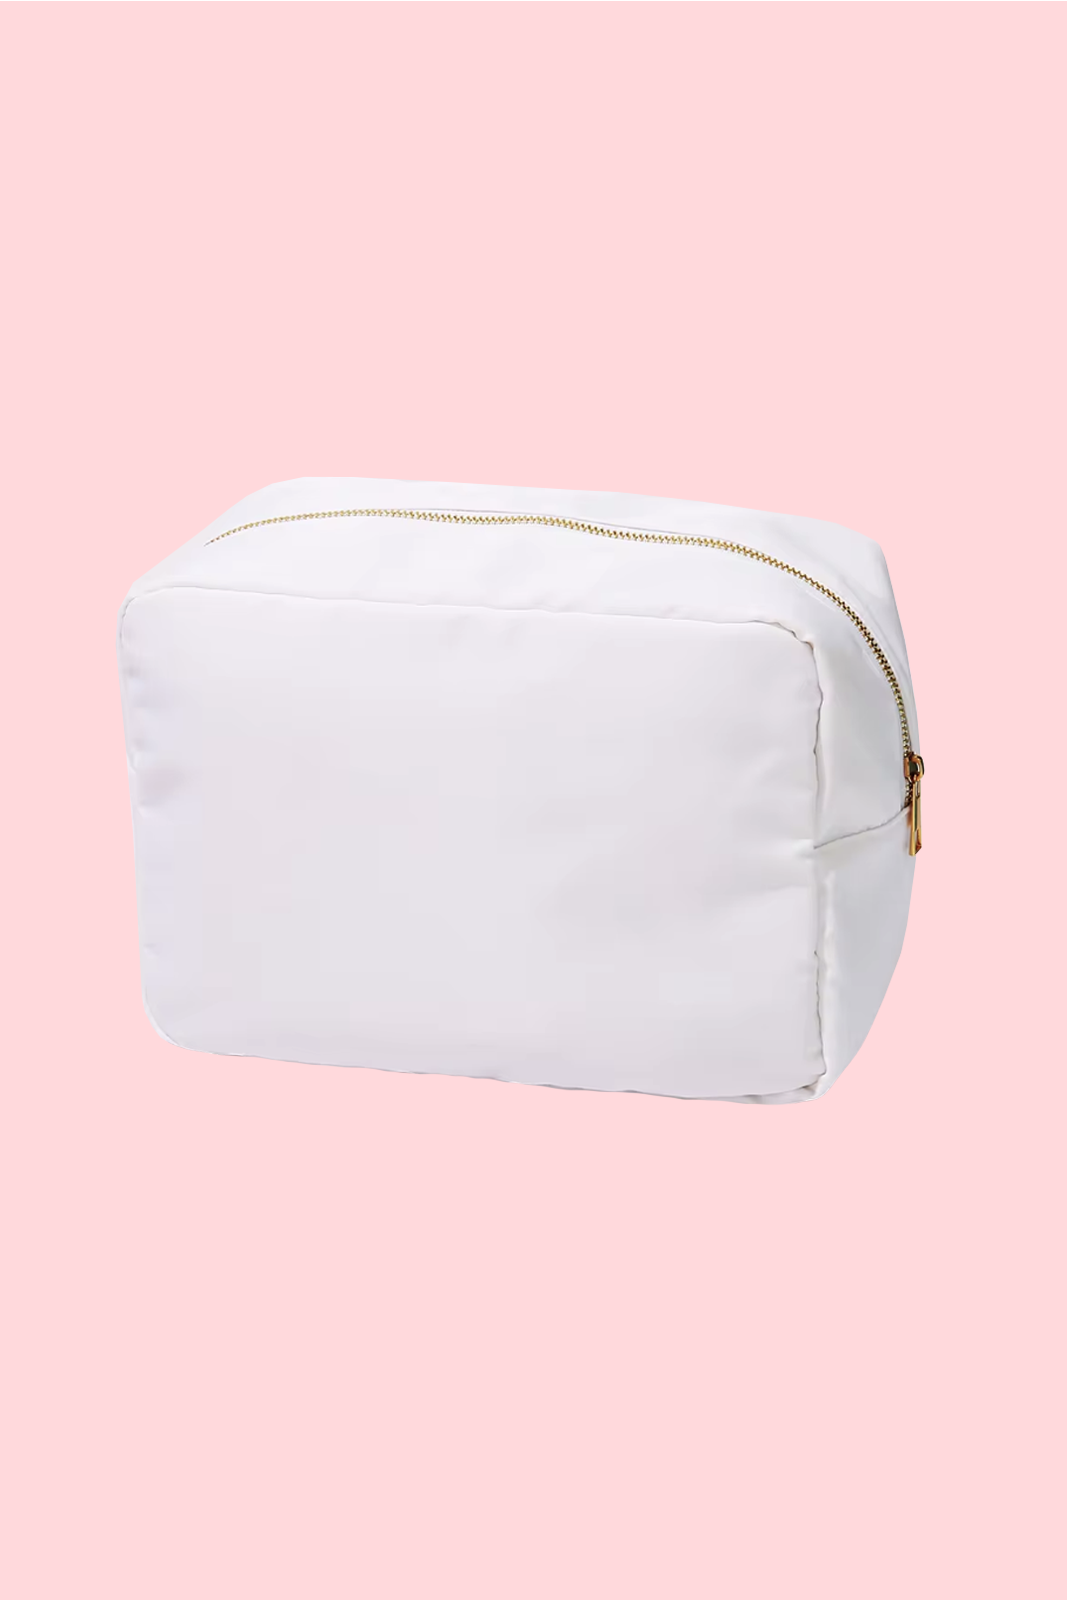 Travel Pouch - Large